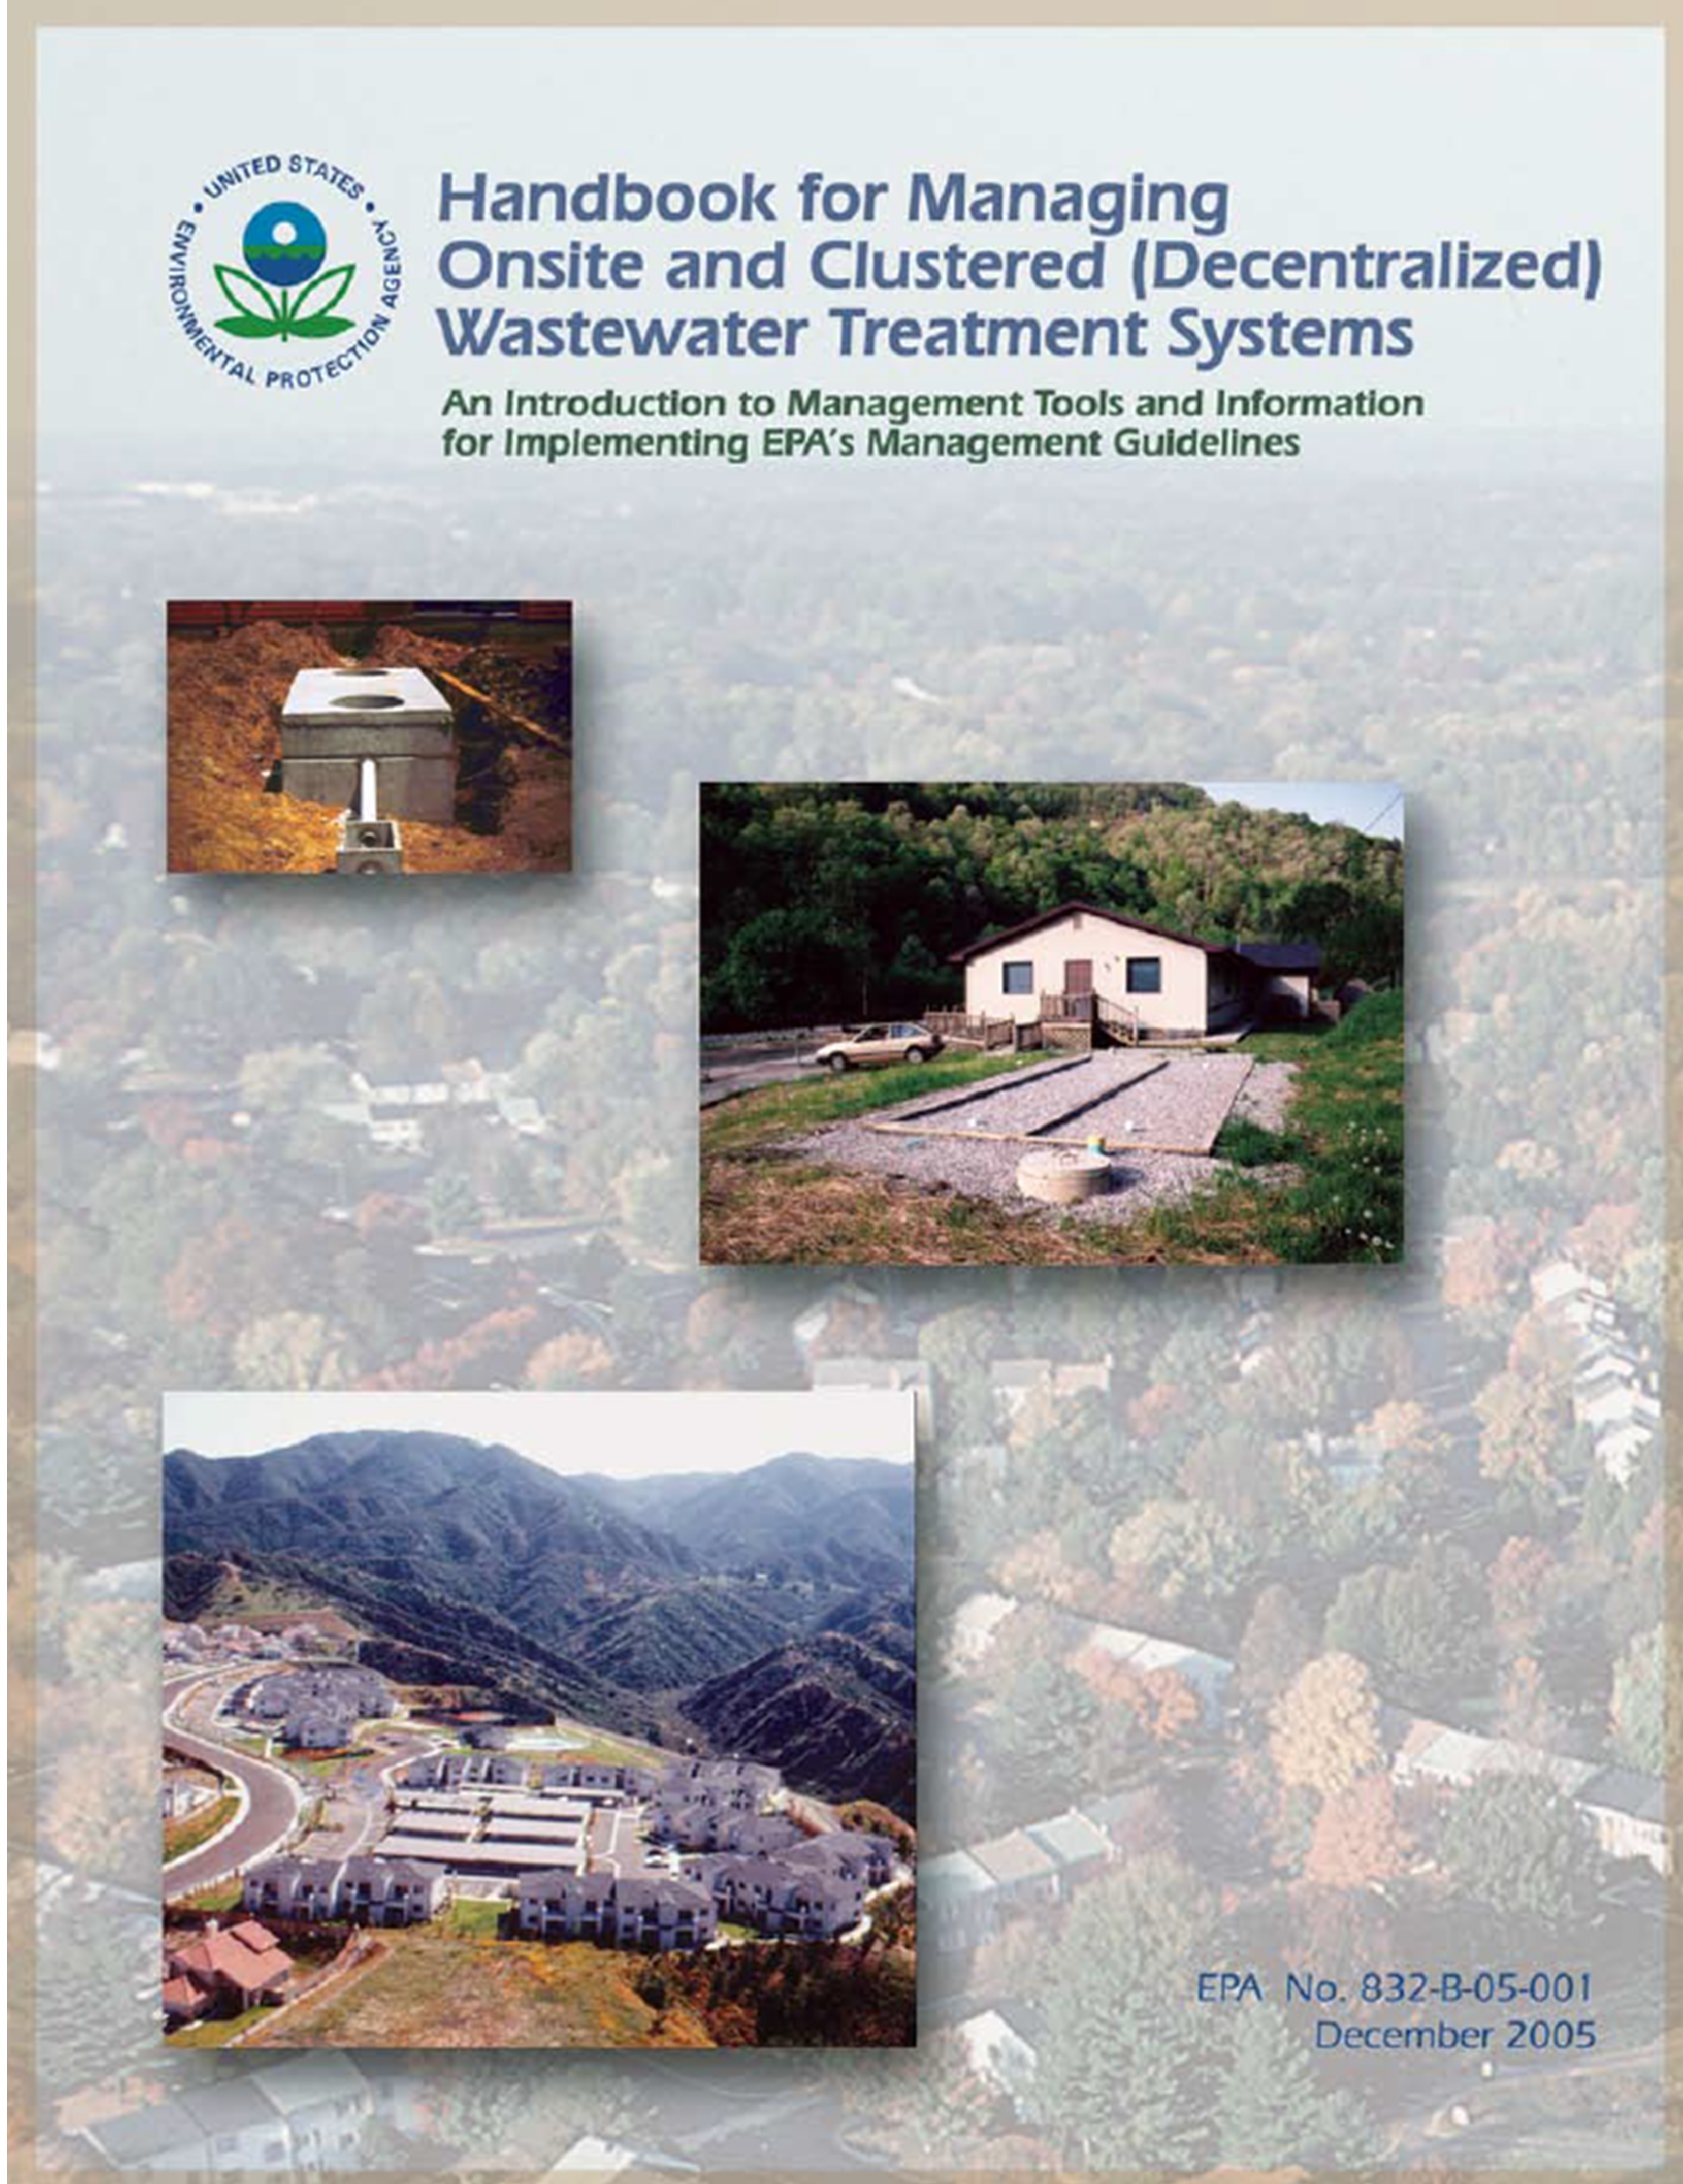 Image of The USEPA Handbook for Managing Onsite and Clustered (Decentralized) Wastewater Treatment Systems